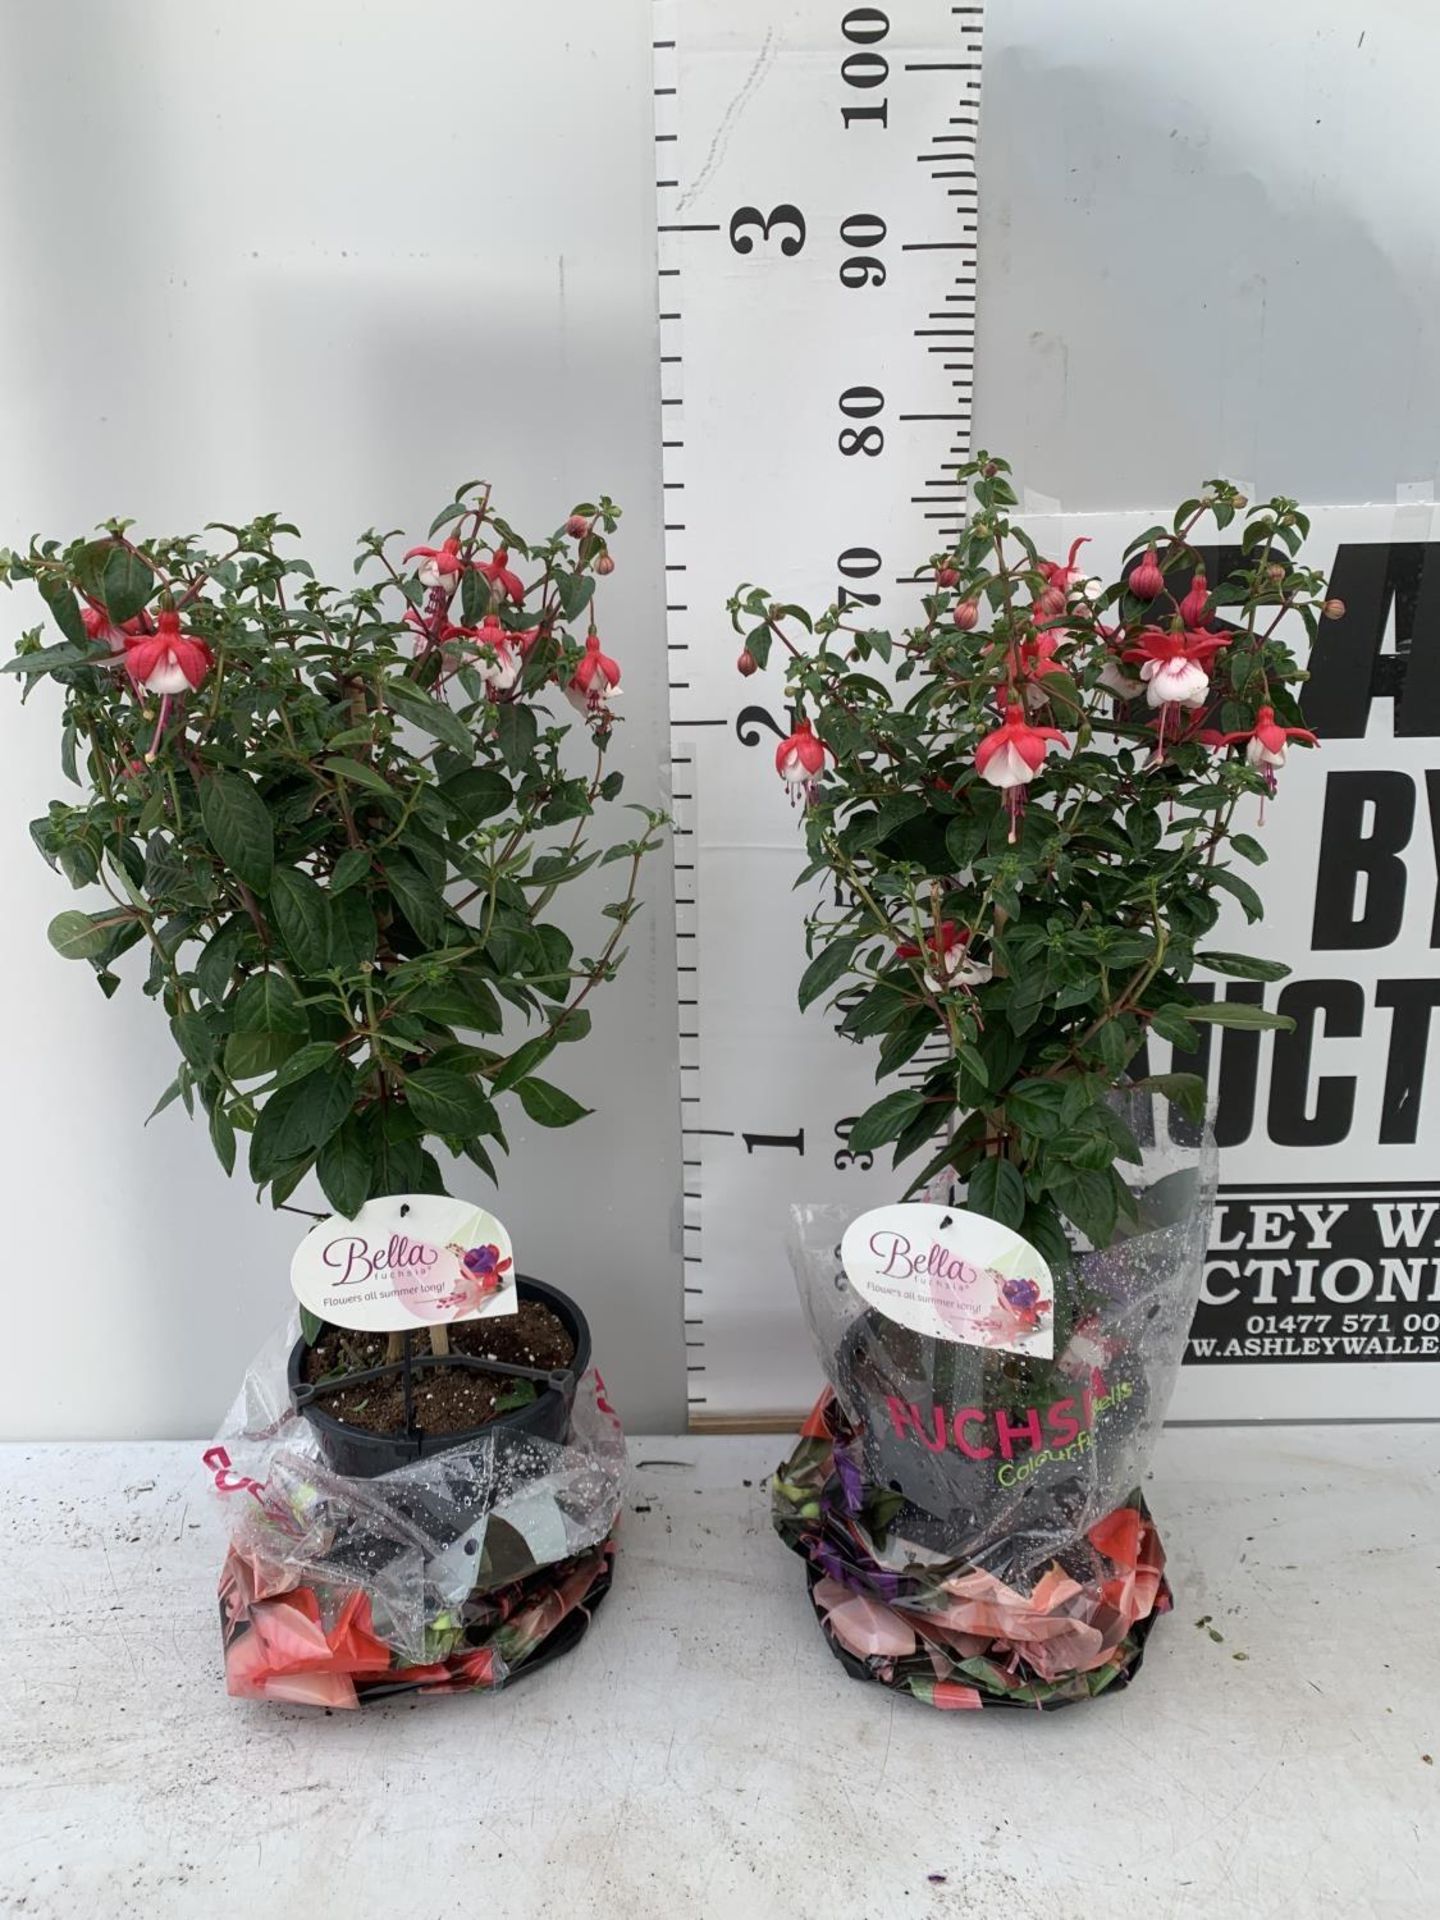 TWO BELLA STANDARD FUCHSIA IN A 3 LTR POTS 70CM -80CM TALL TO BE SOLD FOR THE TWO PLUS VAT